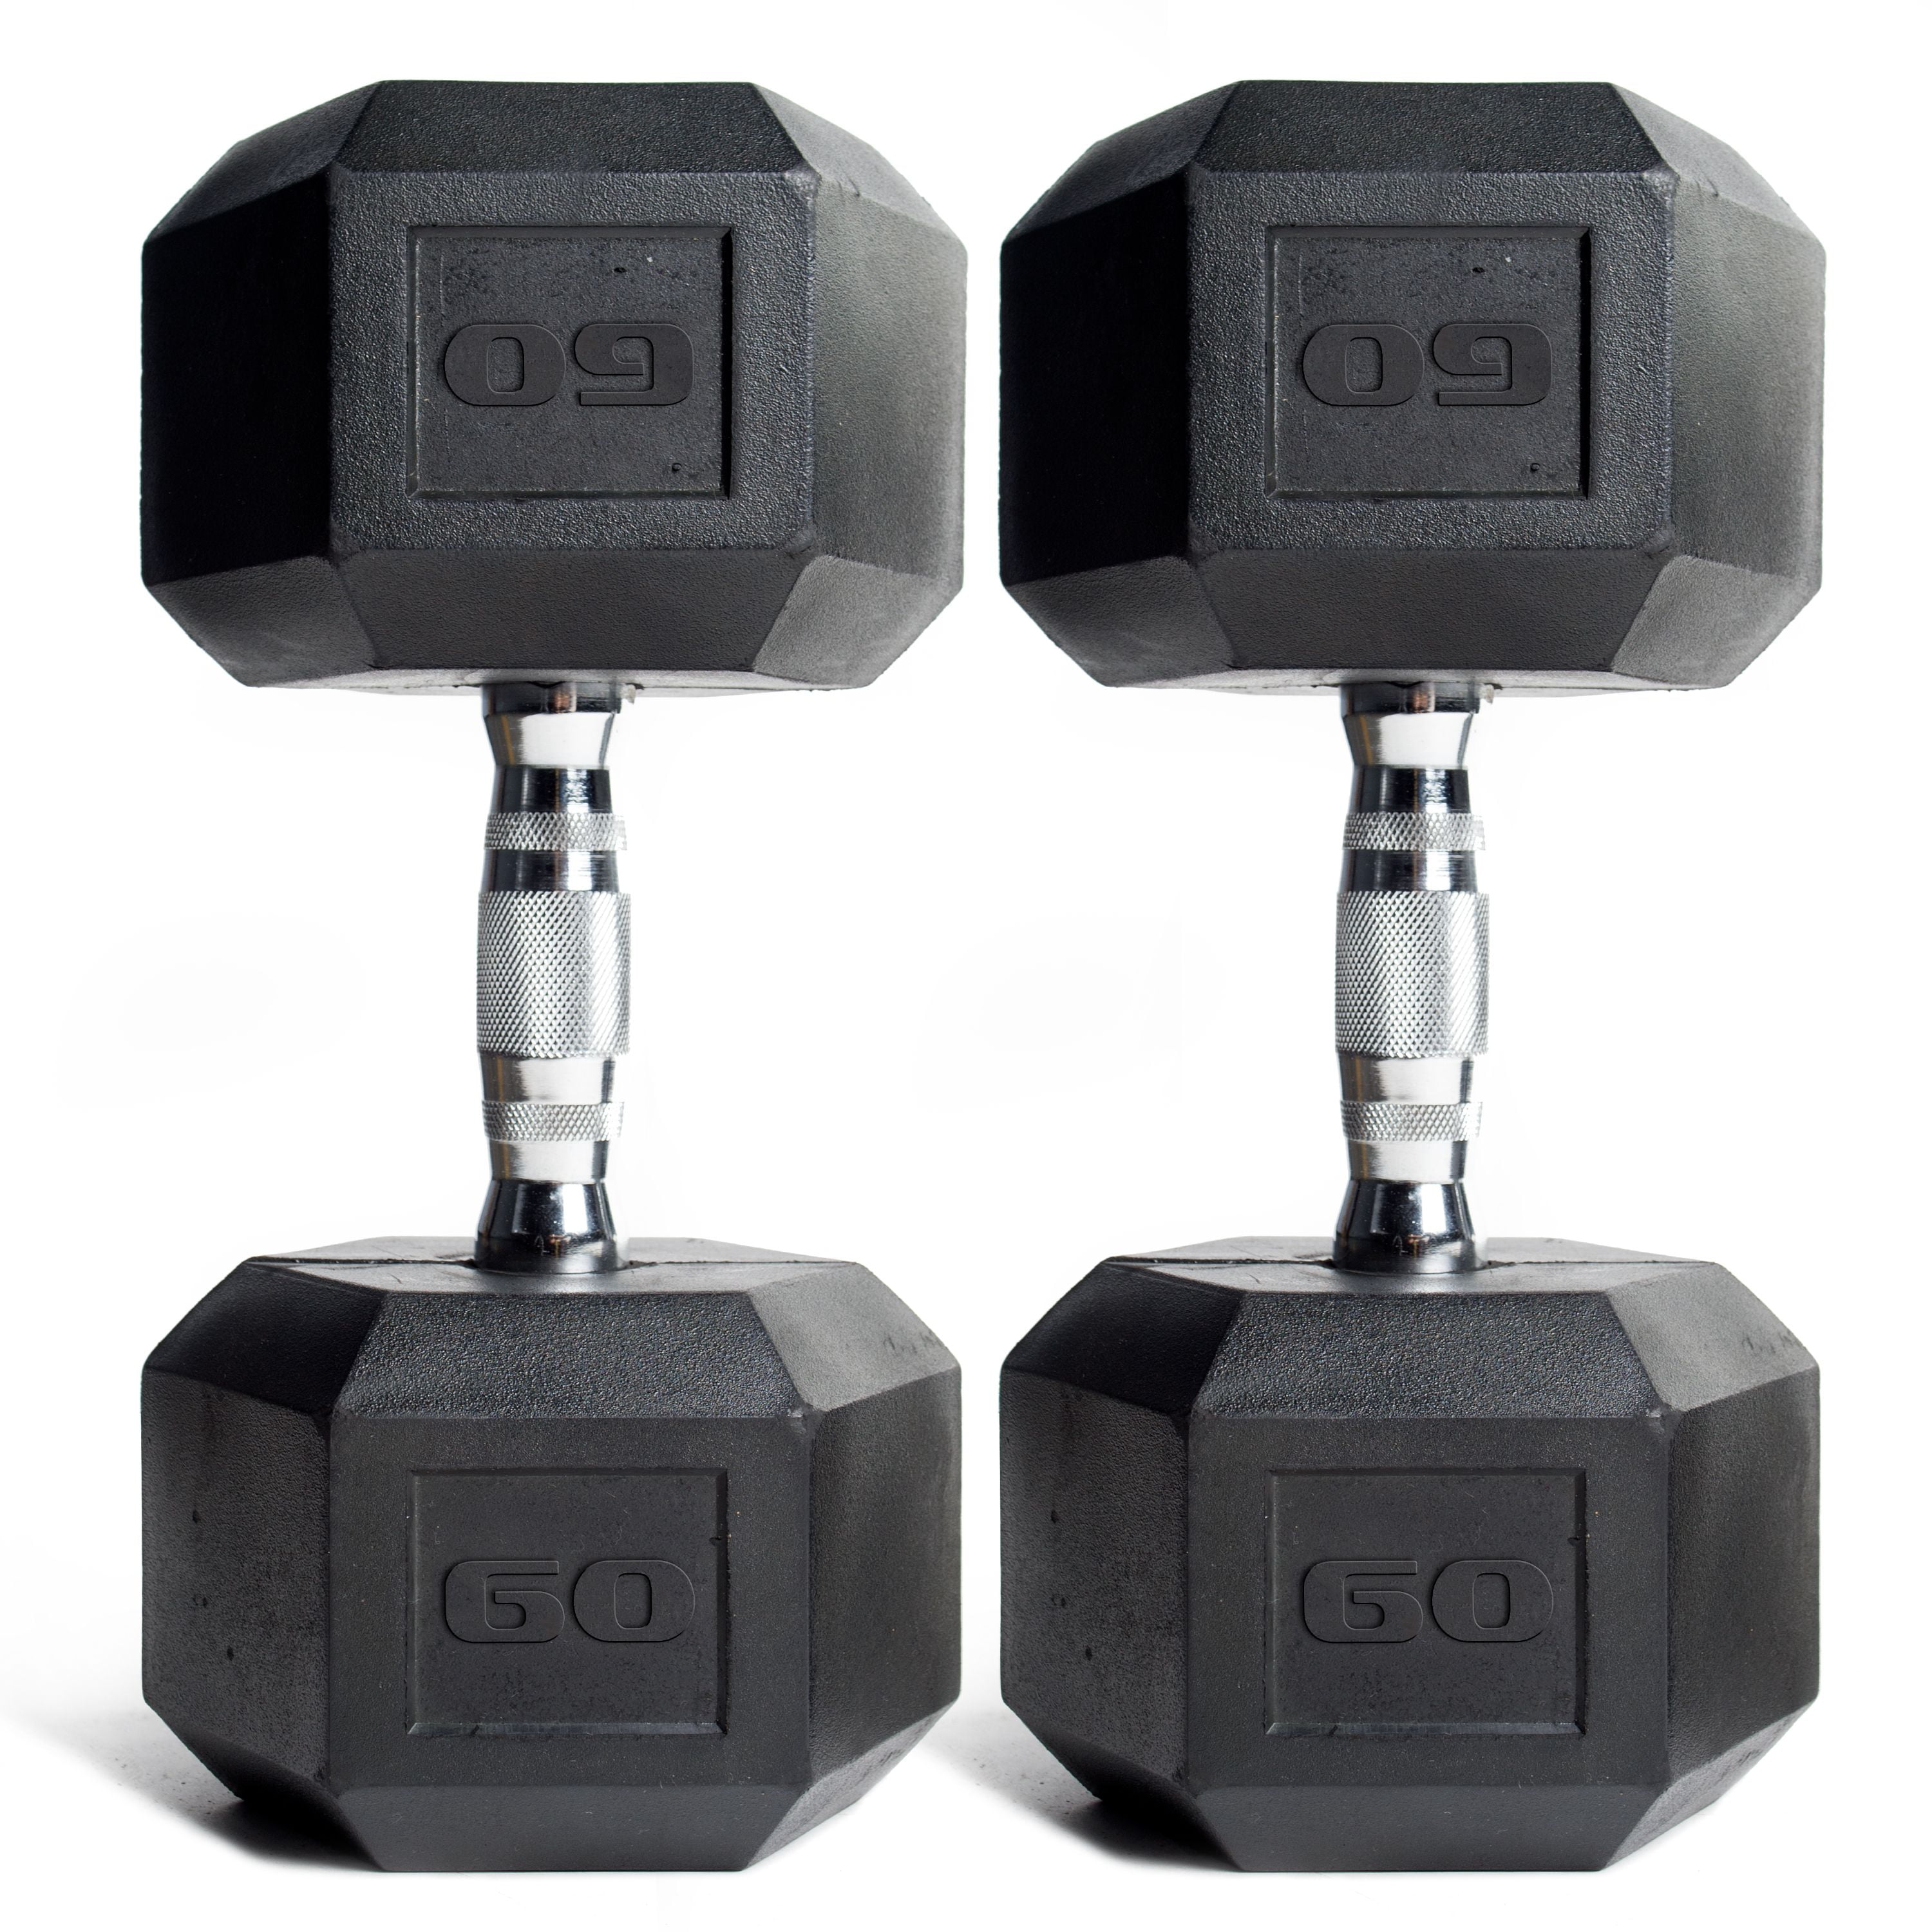 Home Gym 2 NEW Weider Cast Iron Hex 30 lb Dumbbell SetKnurled Grip60 lbs 